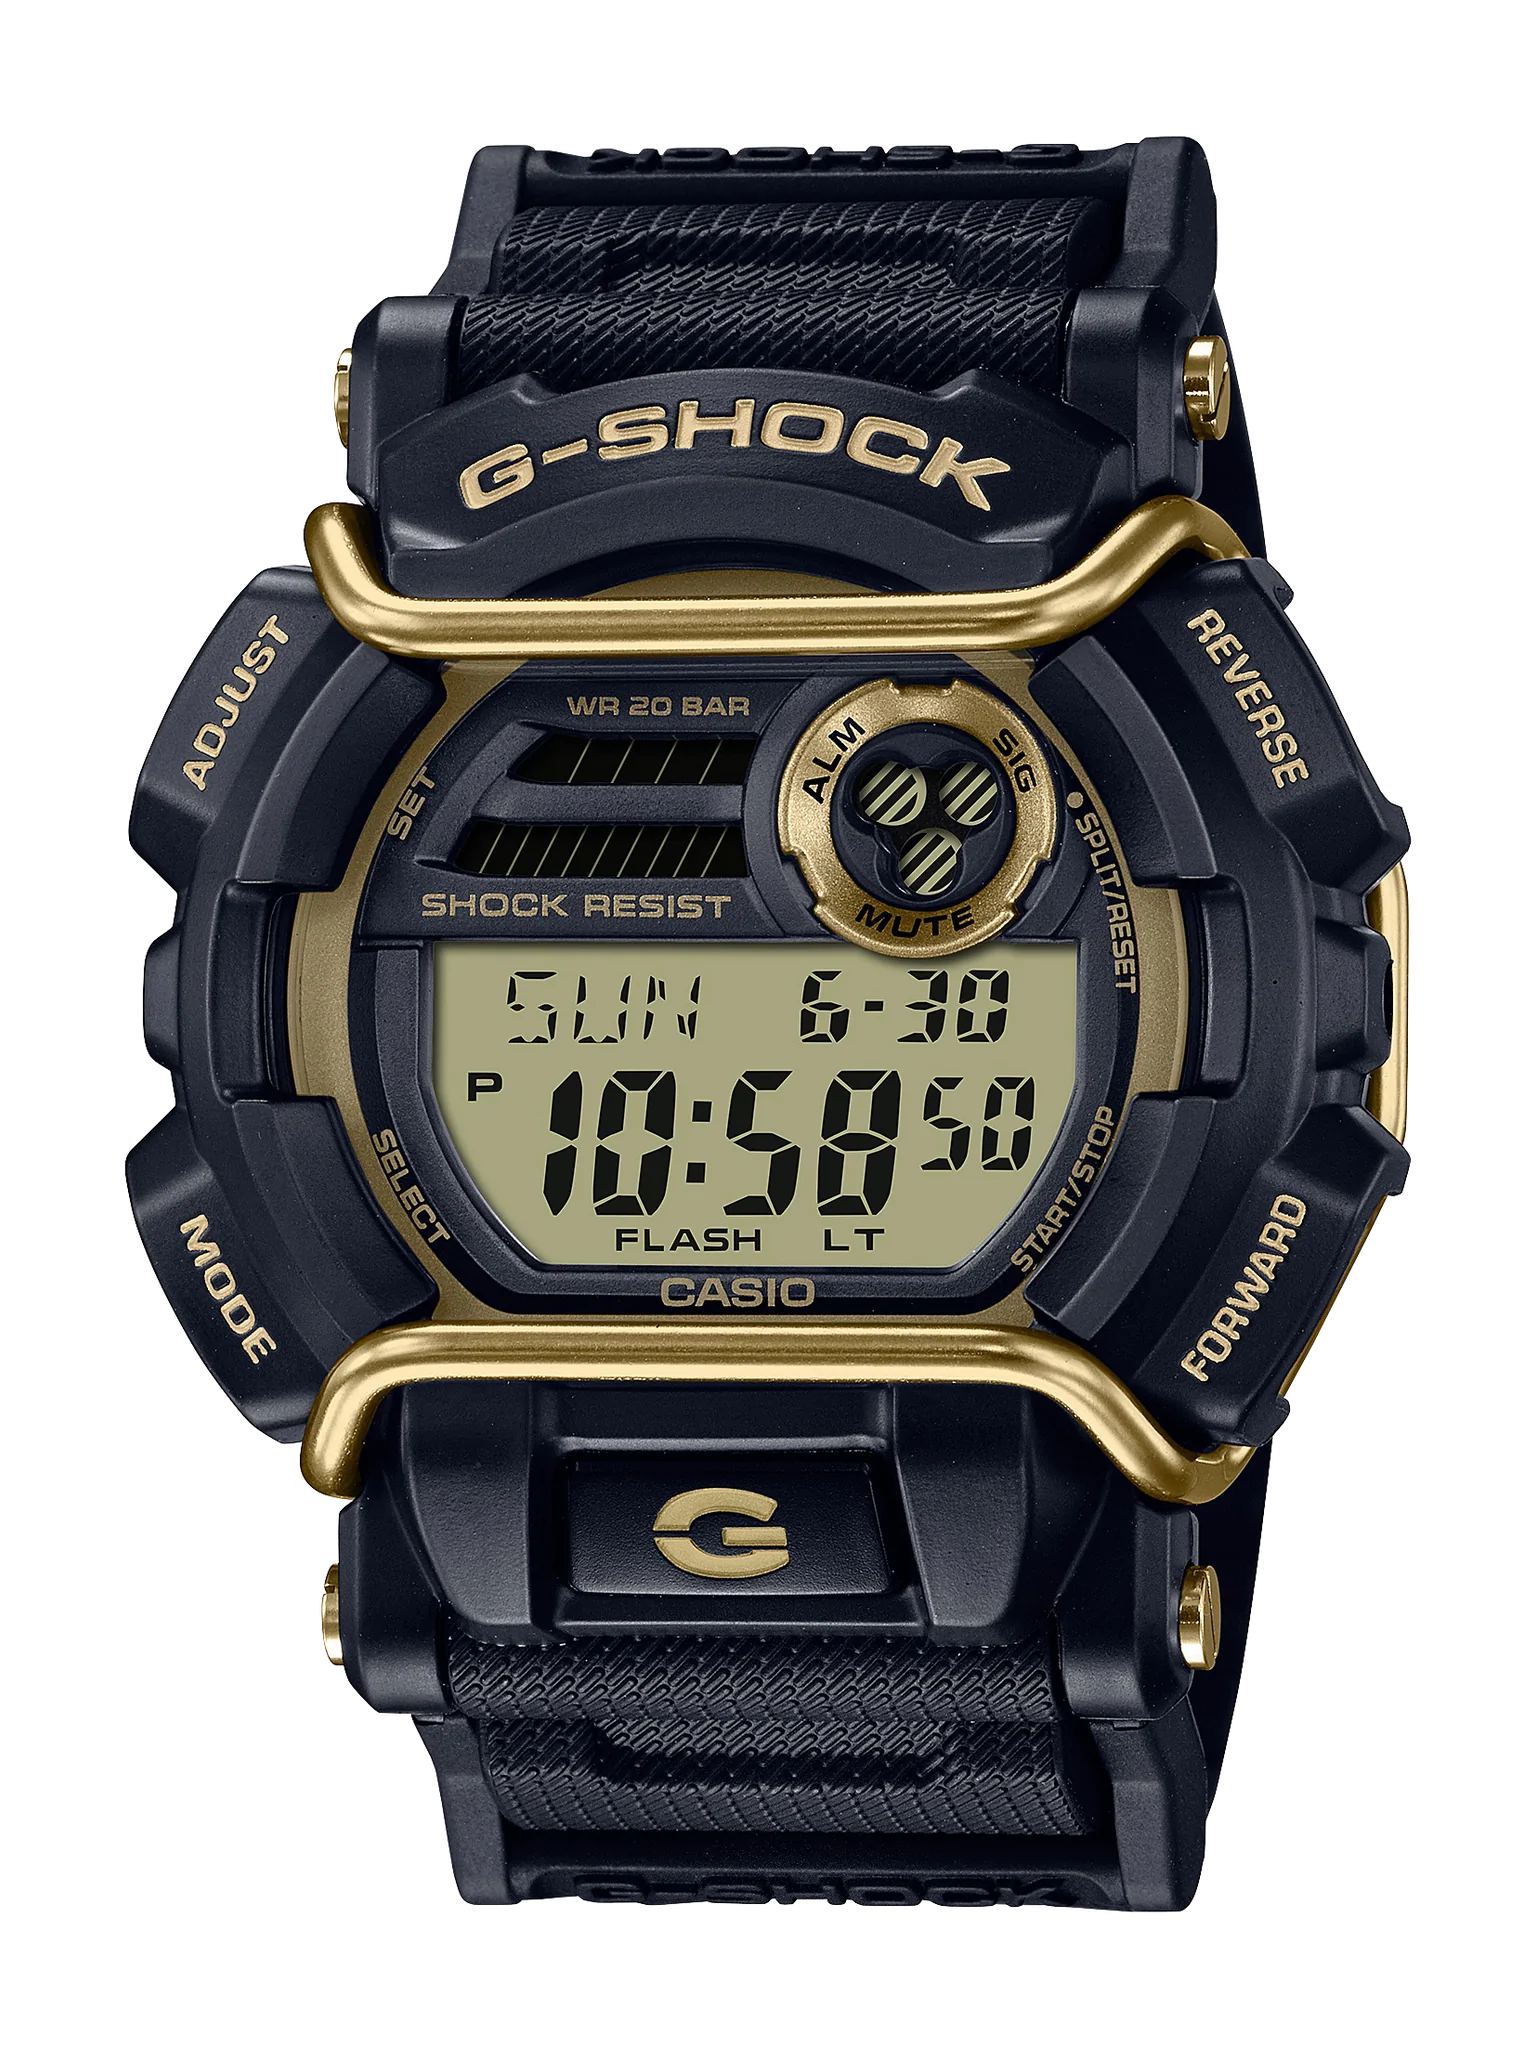 G Shock Digital 200M, W/Time, 1/100 S/Watch BLK & Gold Case & Resin Band GD400GB-1B2